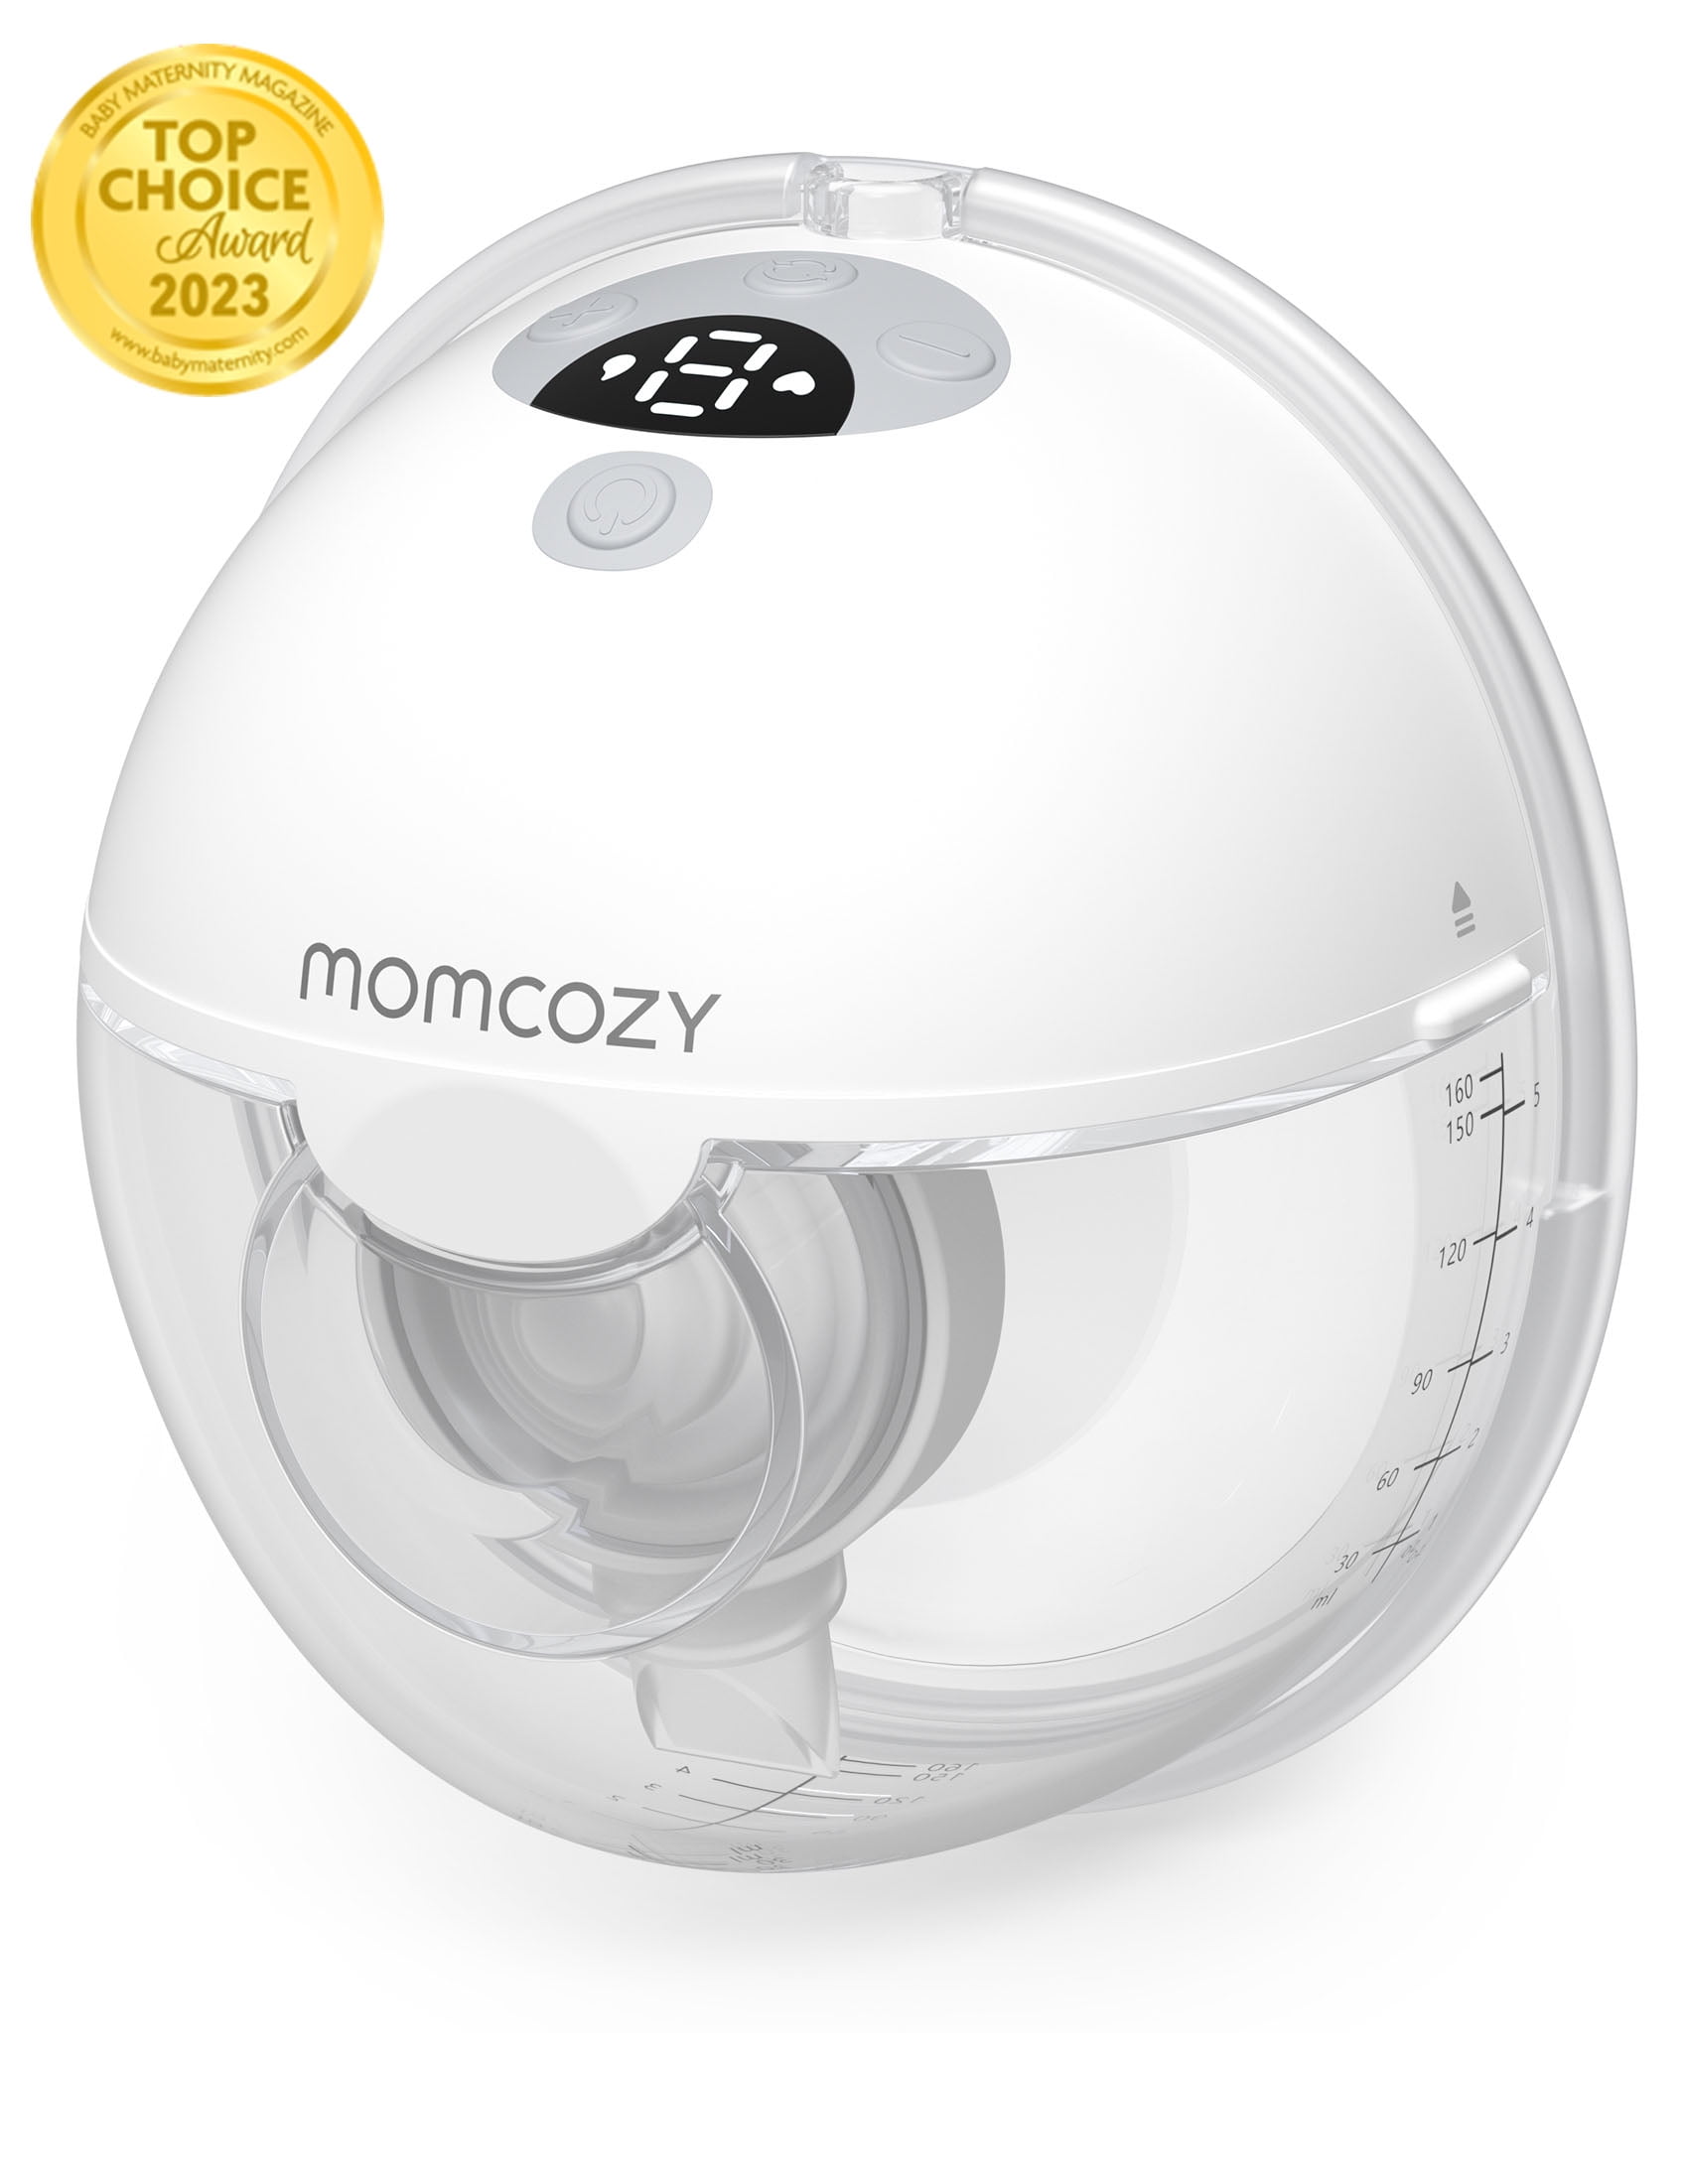 Momcozy Muse 5 Wearable Breast Pump, Electric Breast Pump Hands